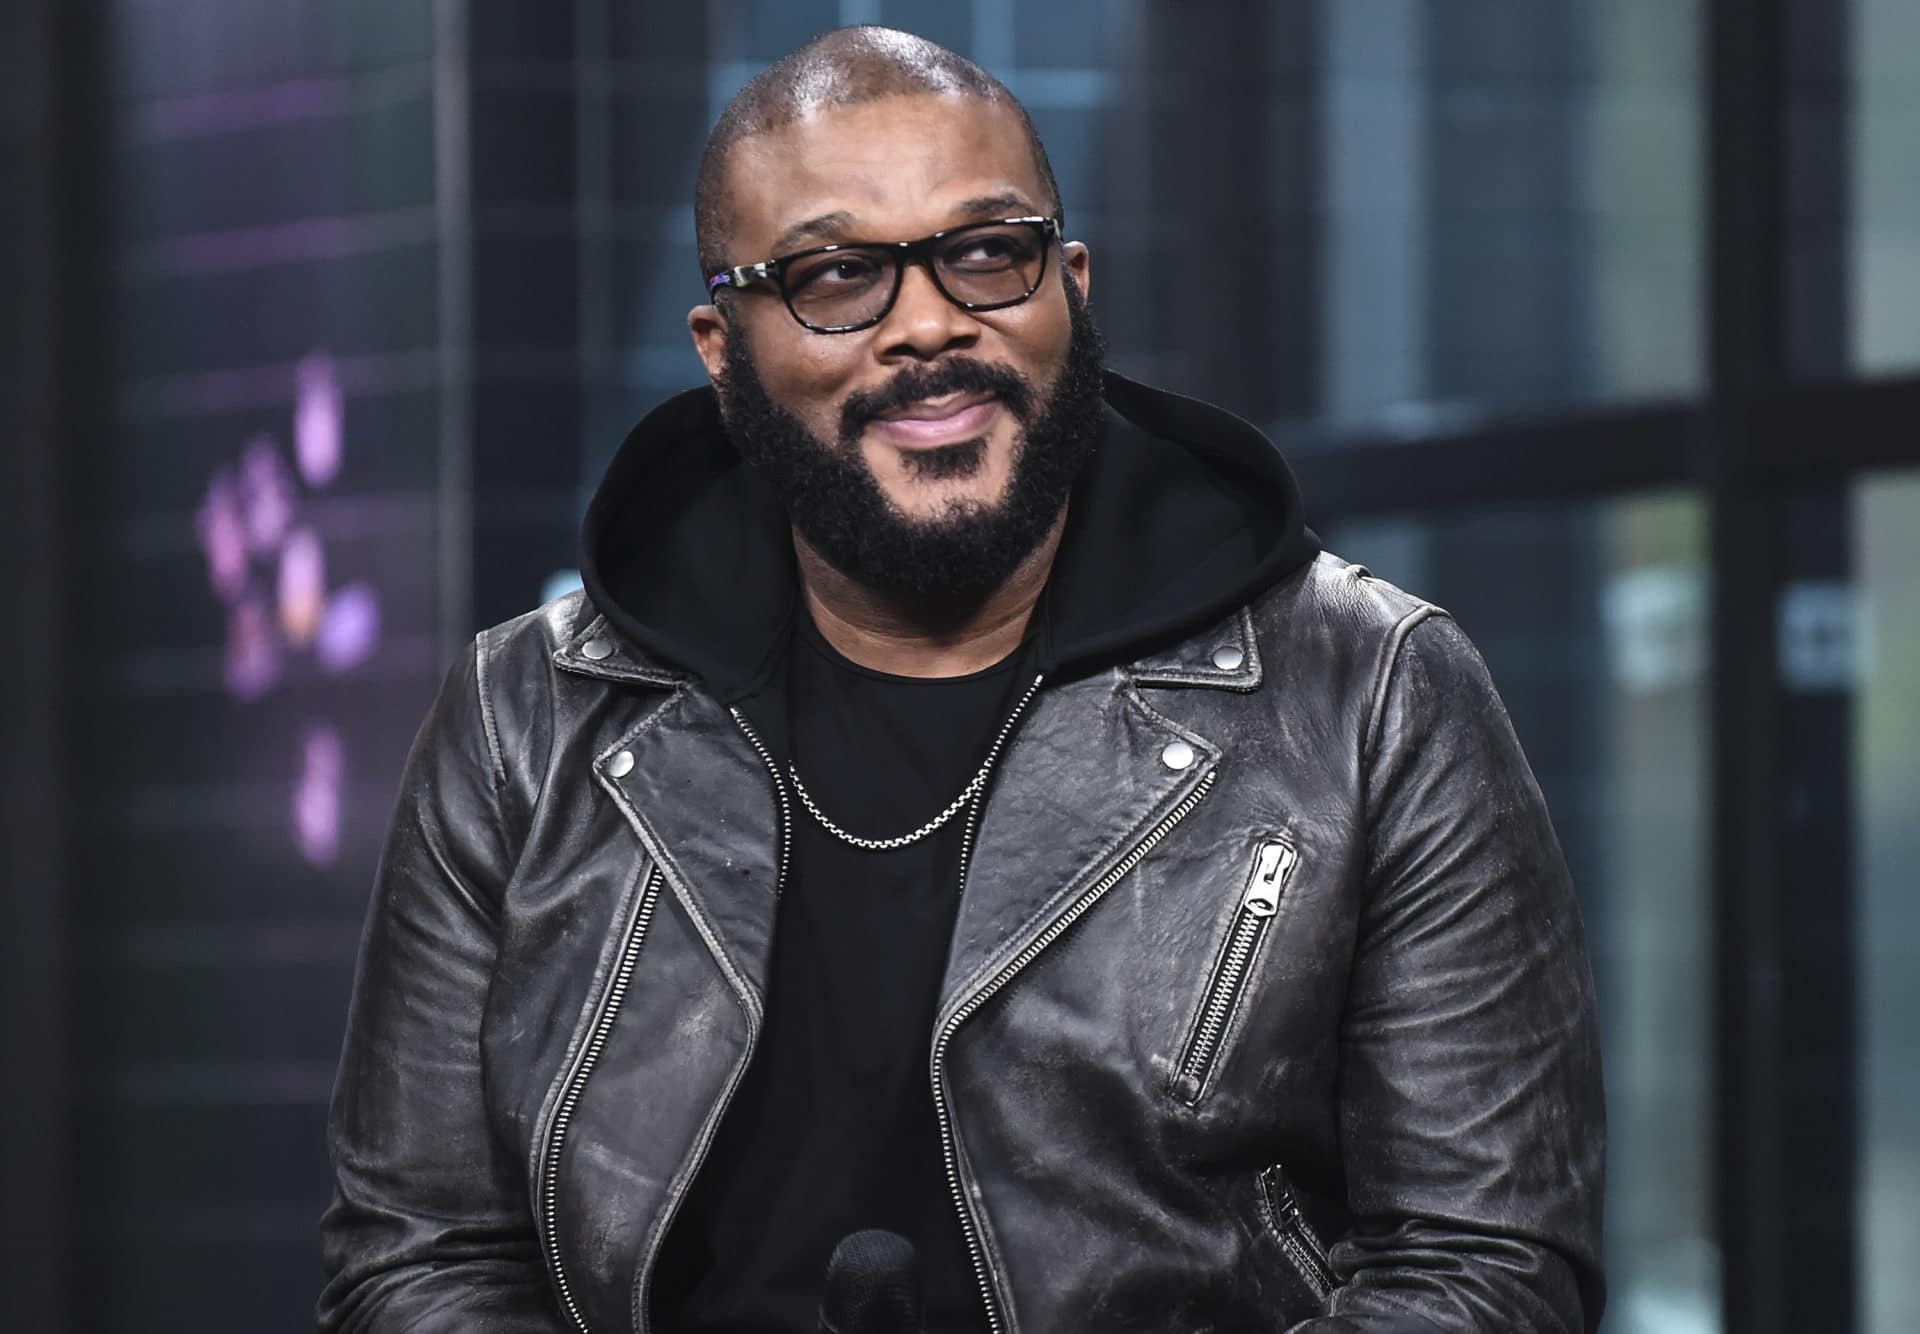 Watch Tyler Perry Explain What Is Going On In Beyoncé’s Madea Instagram Photo